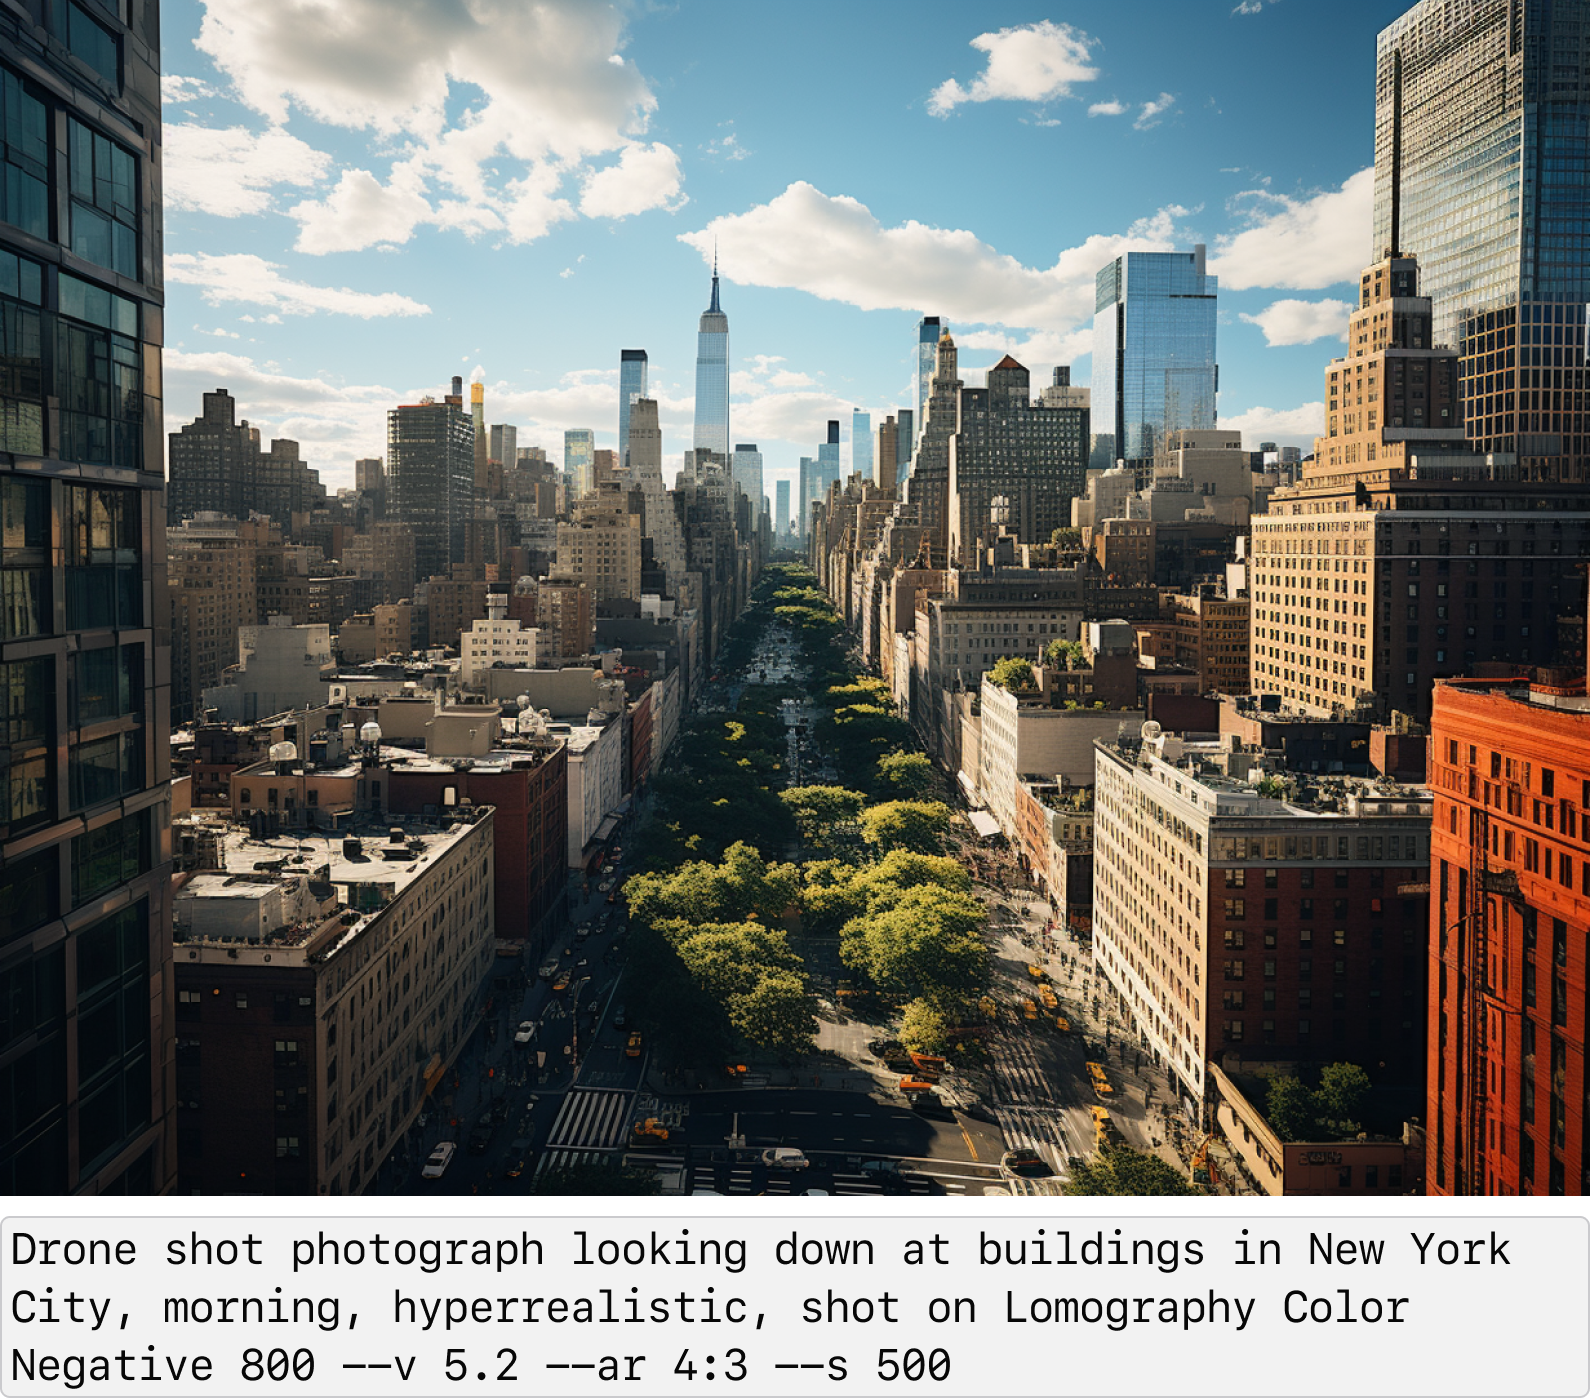 Drone shot photograph looking down at buildings in New York City, morning, hyperrealistic